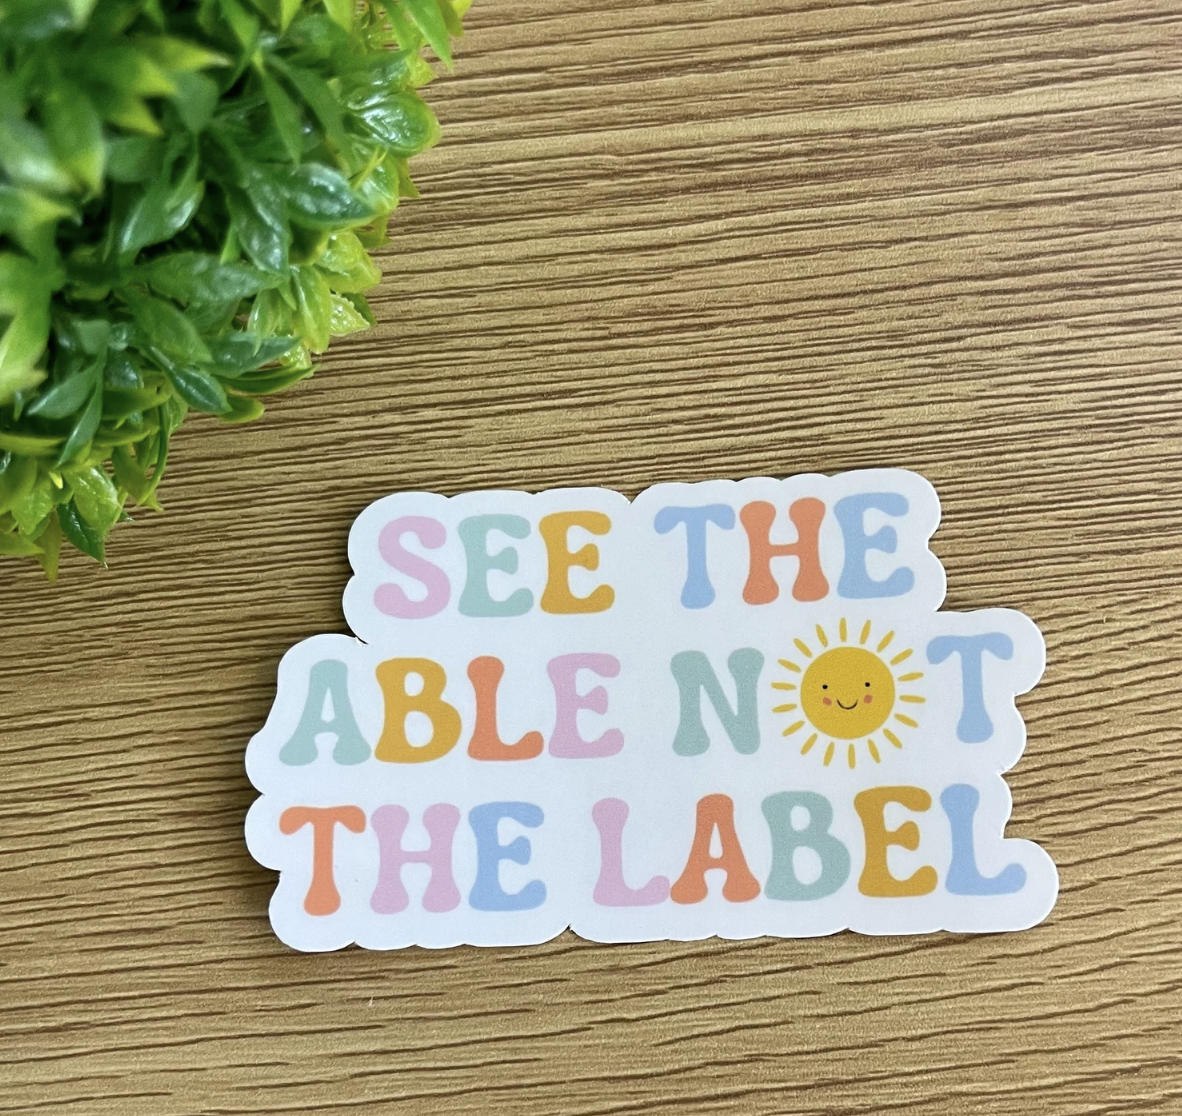 Sticker #124 | See the Able not the Label Sticker | Laptop & Water Bottle Sticker Decal